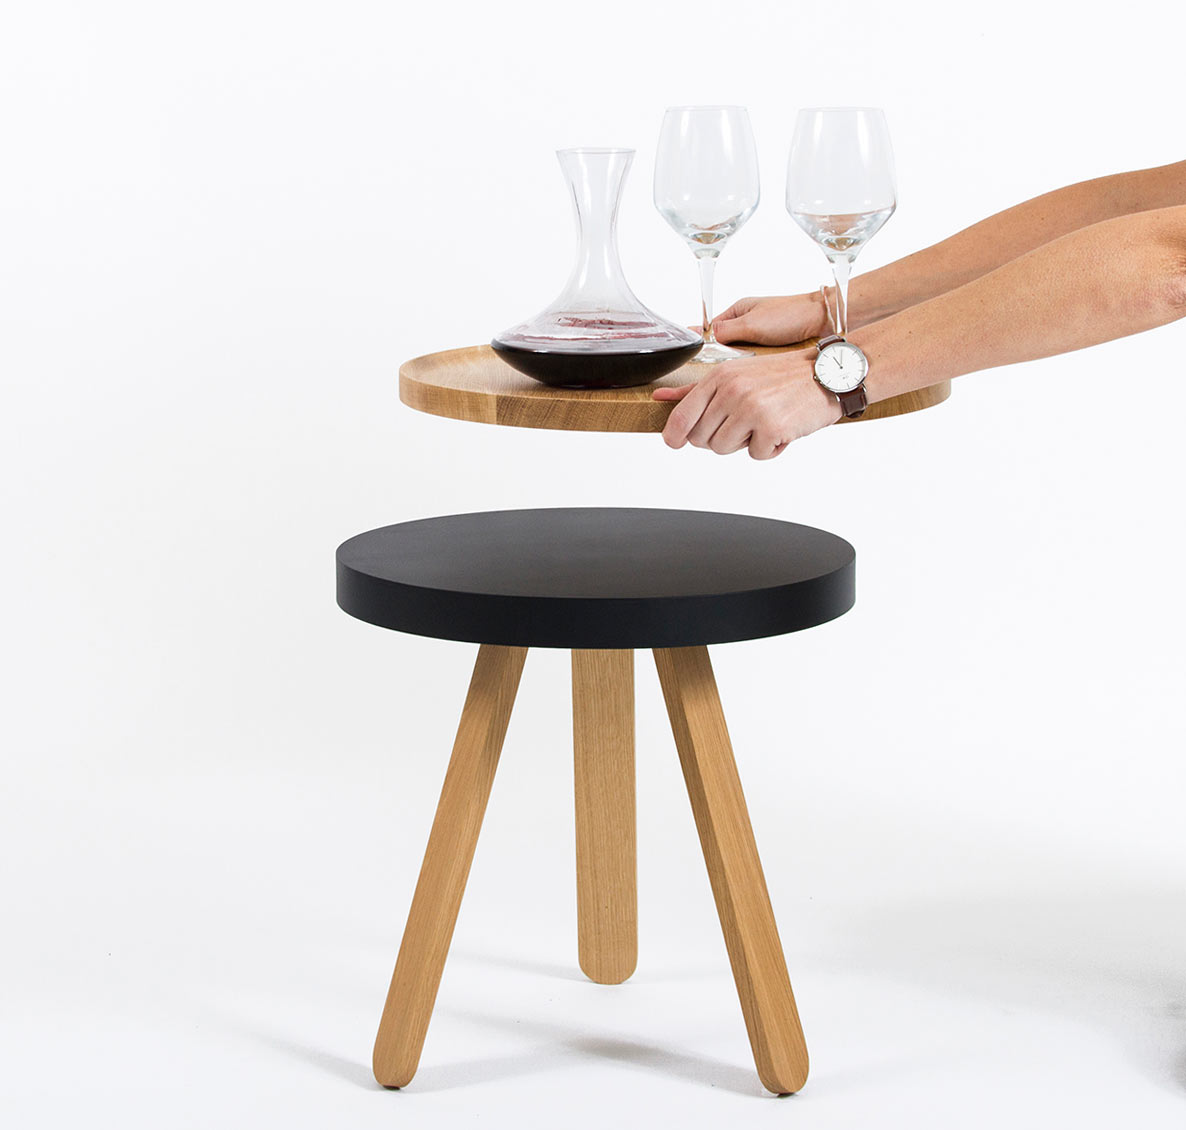 Batea: A Side Table with a Serving Tray